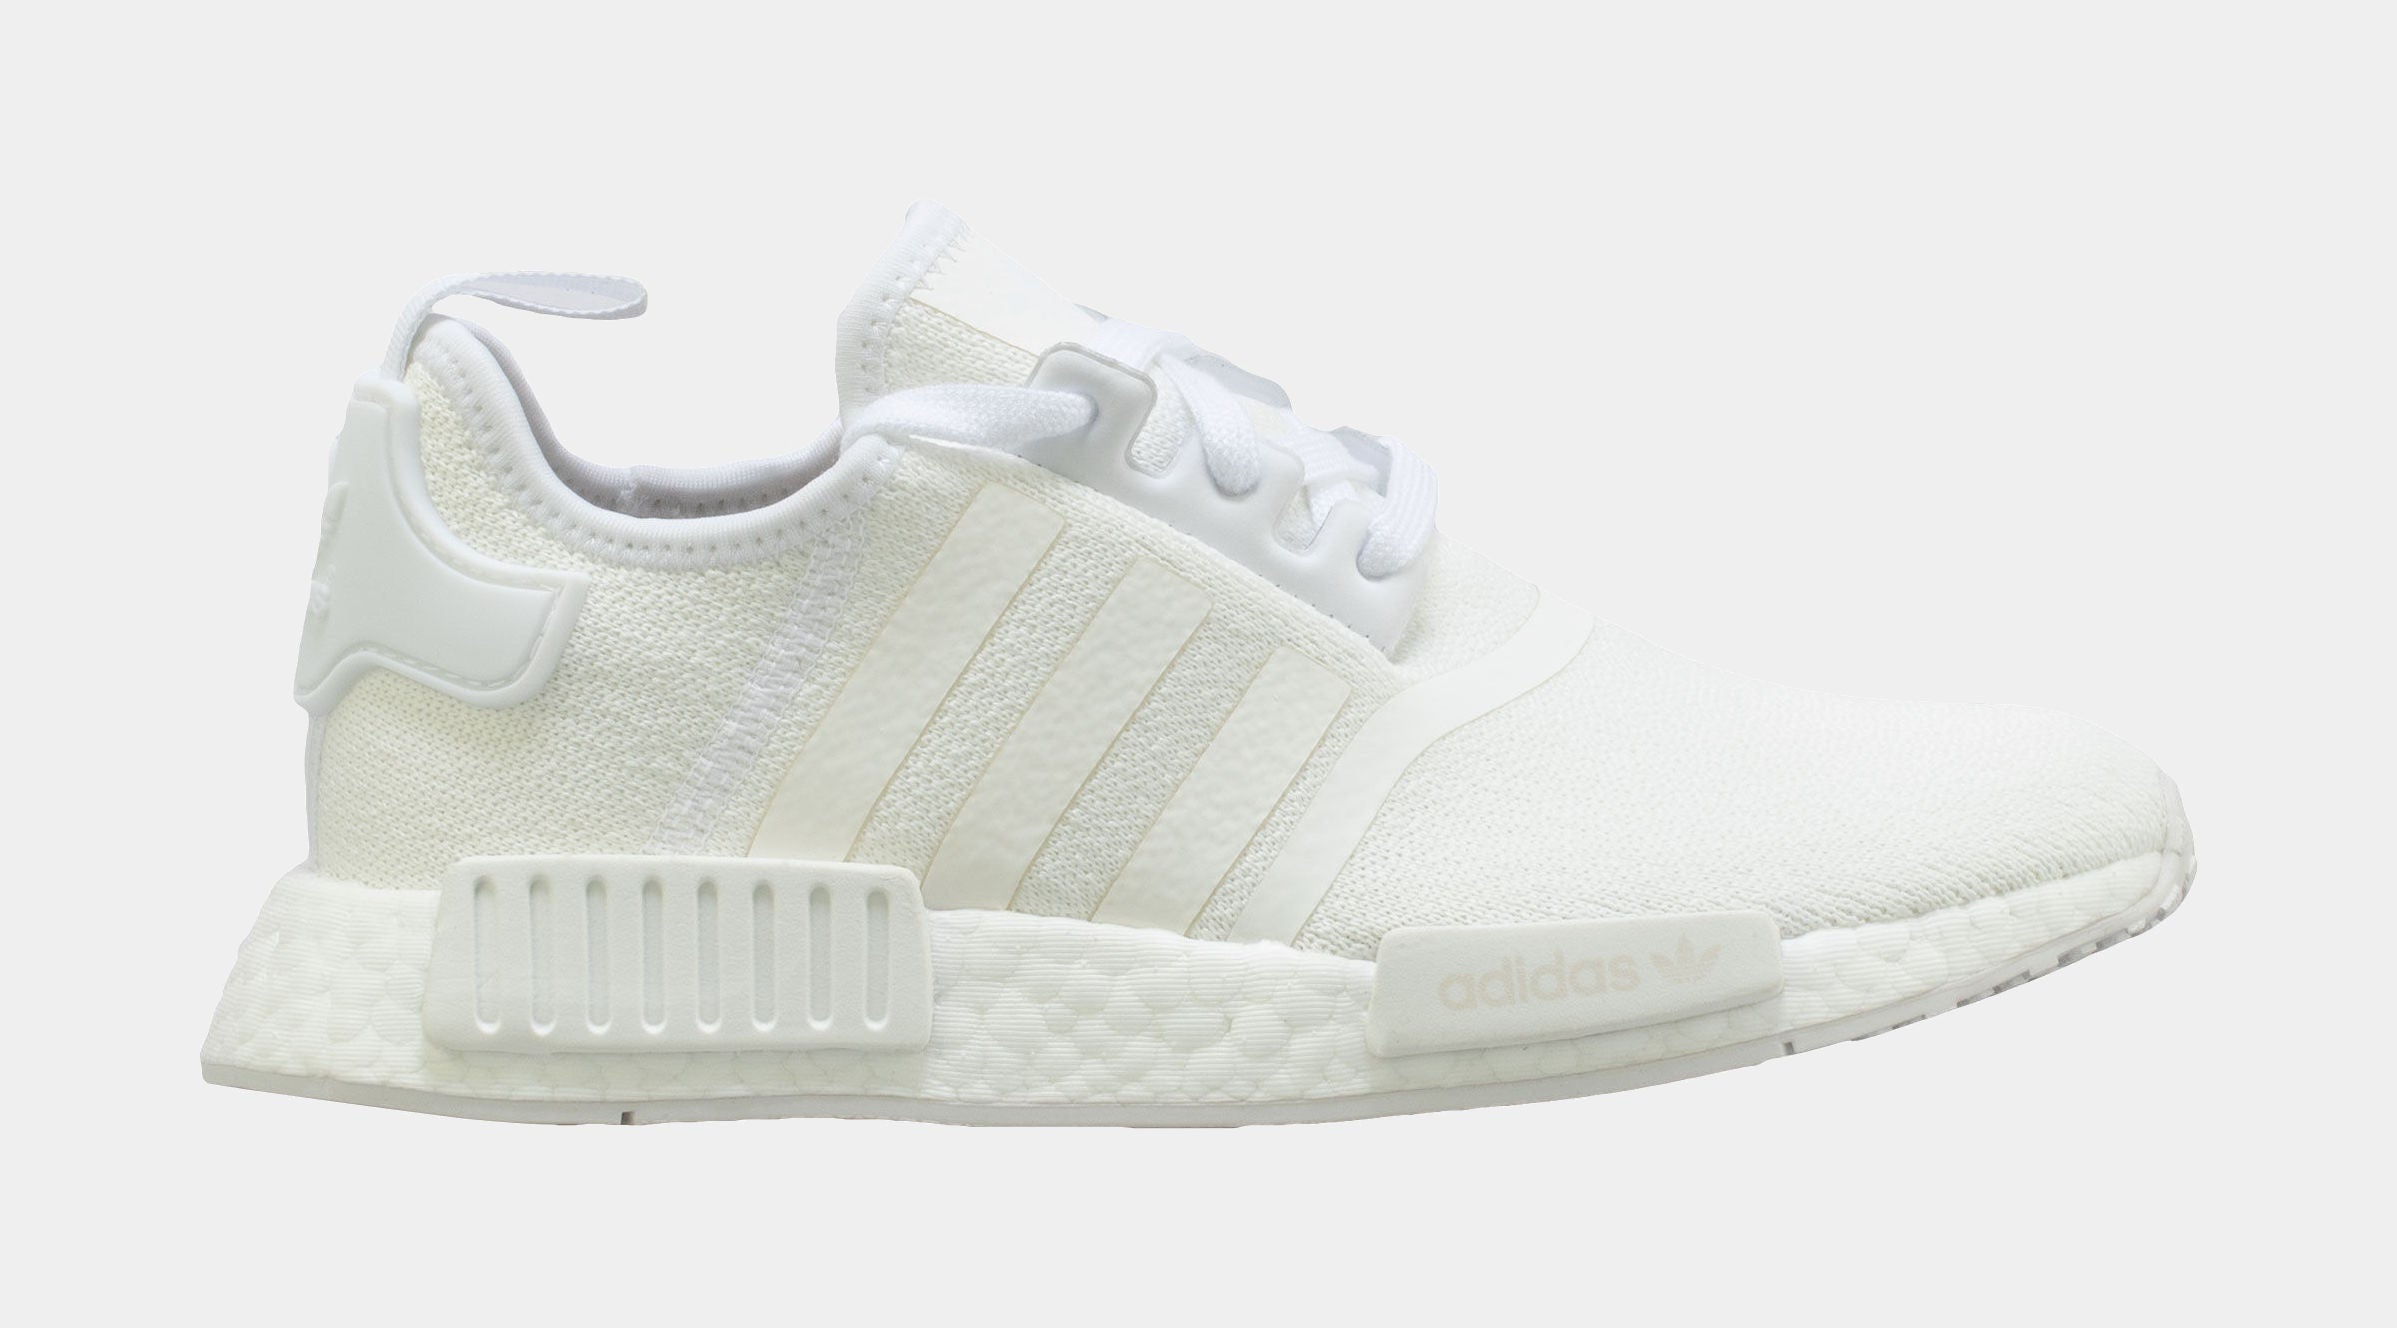 The exclusive @adidas x Shoe Palace NMD R1 SMU available in Men's